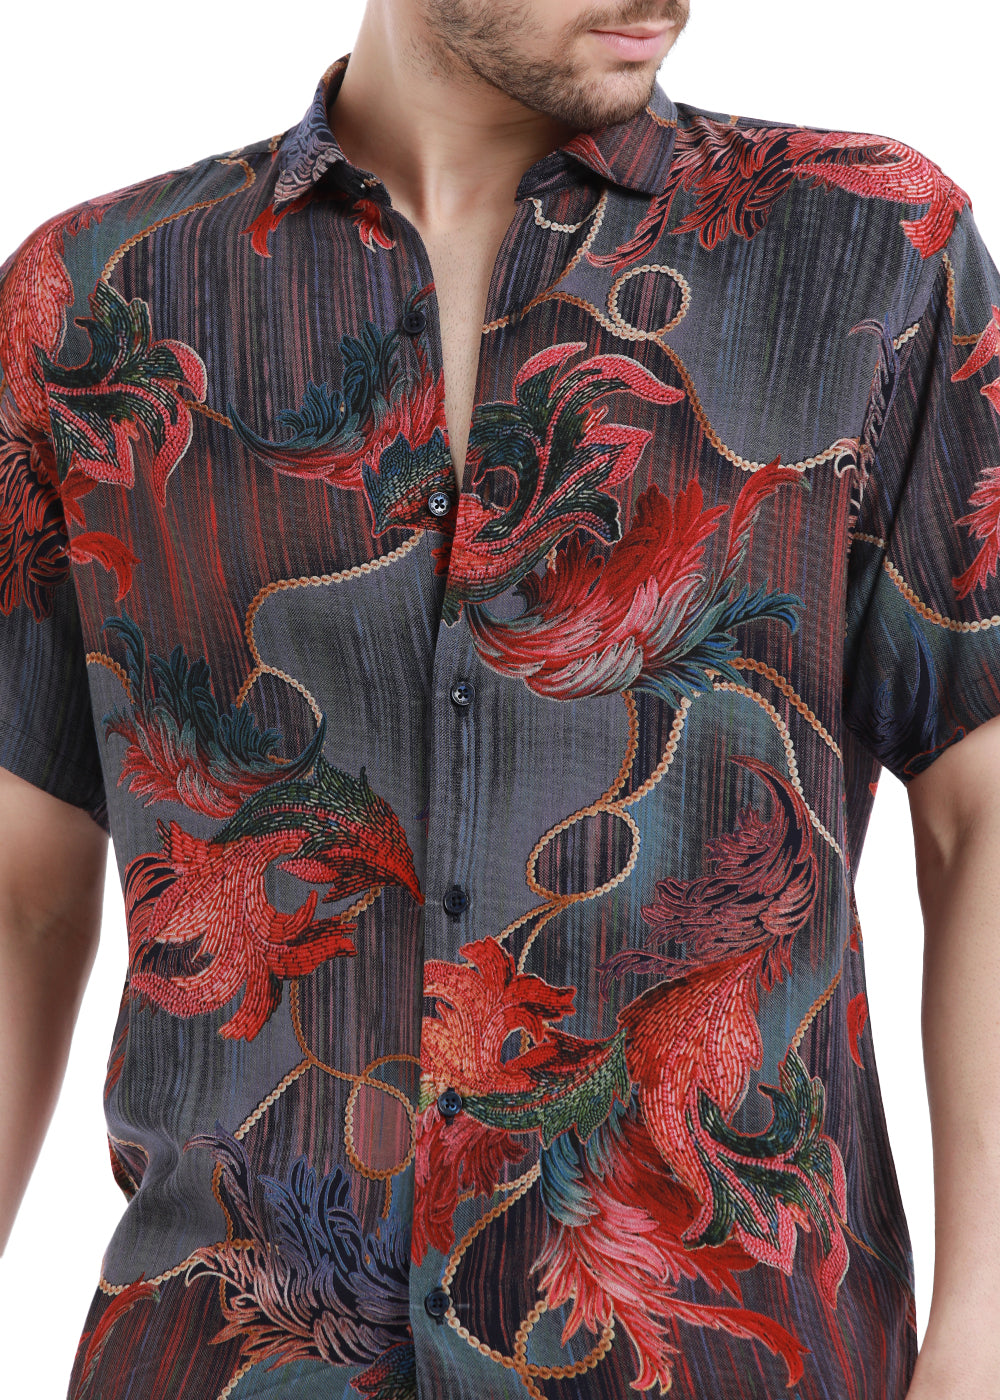 Indigenous Red Half Sleeves Feather Shirt